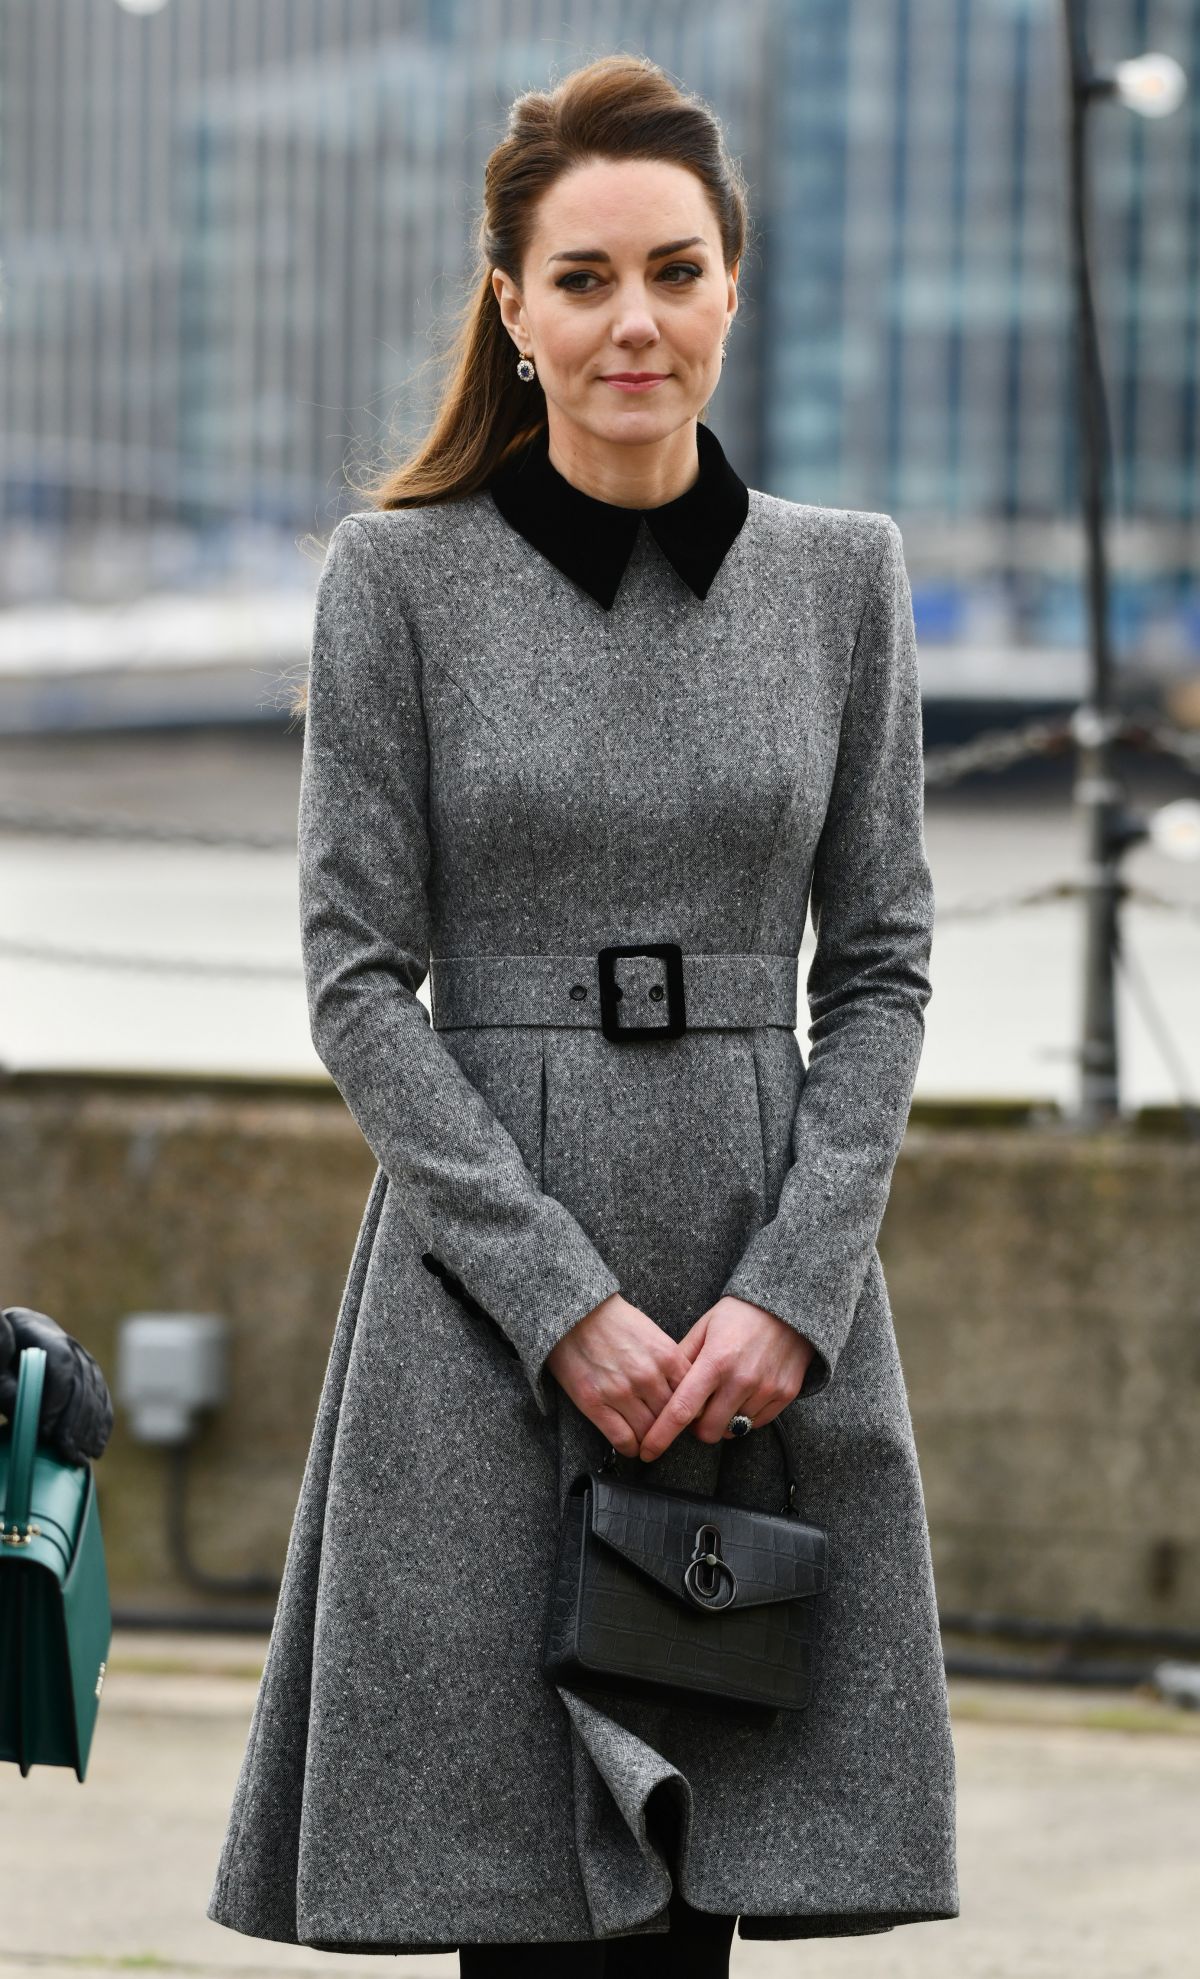 KATE MIDDLETON at Prince’s Foundation Training Site in London 02/03 ...